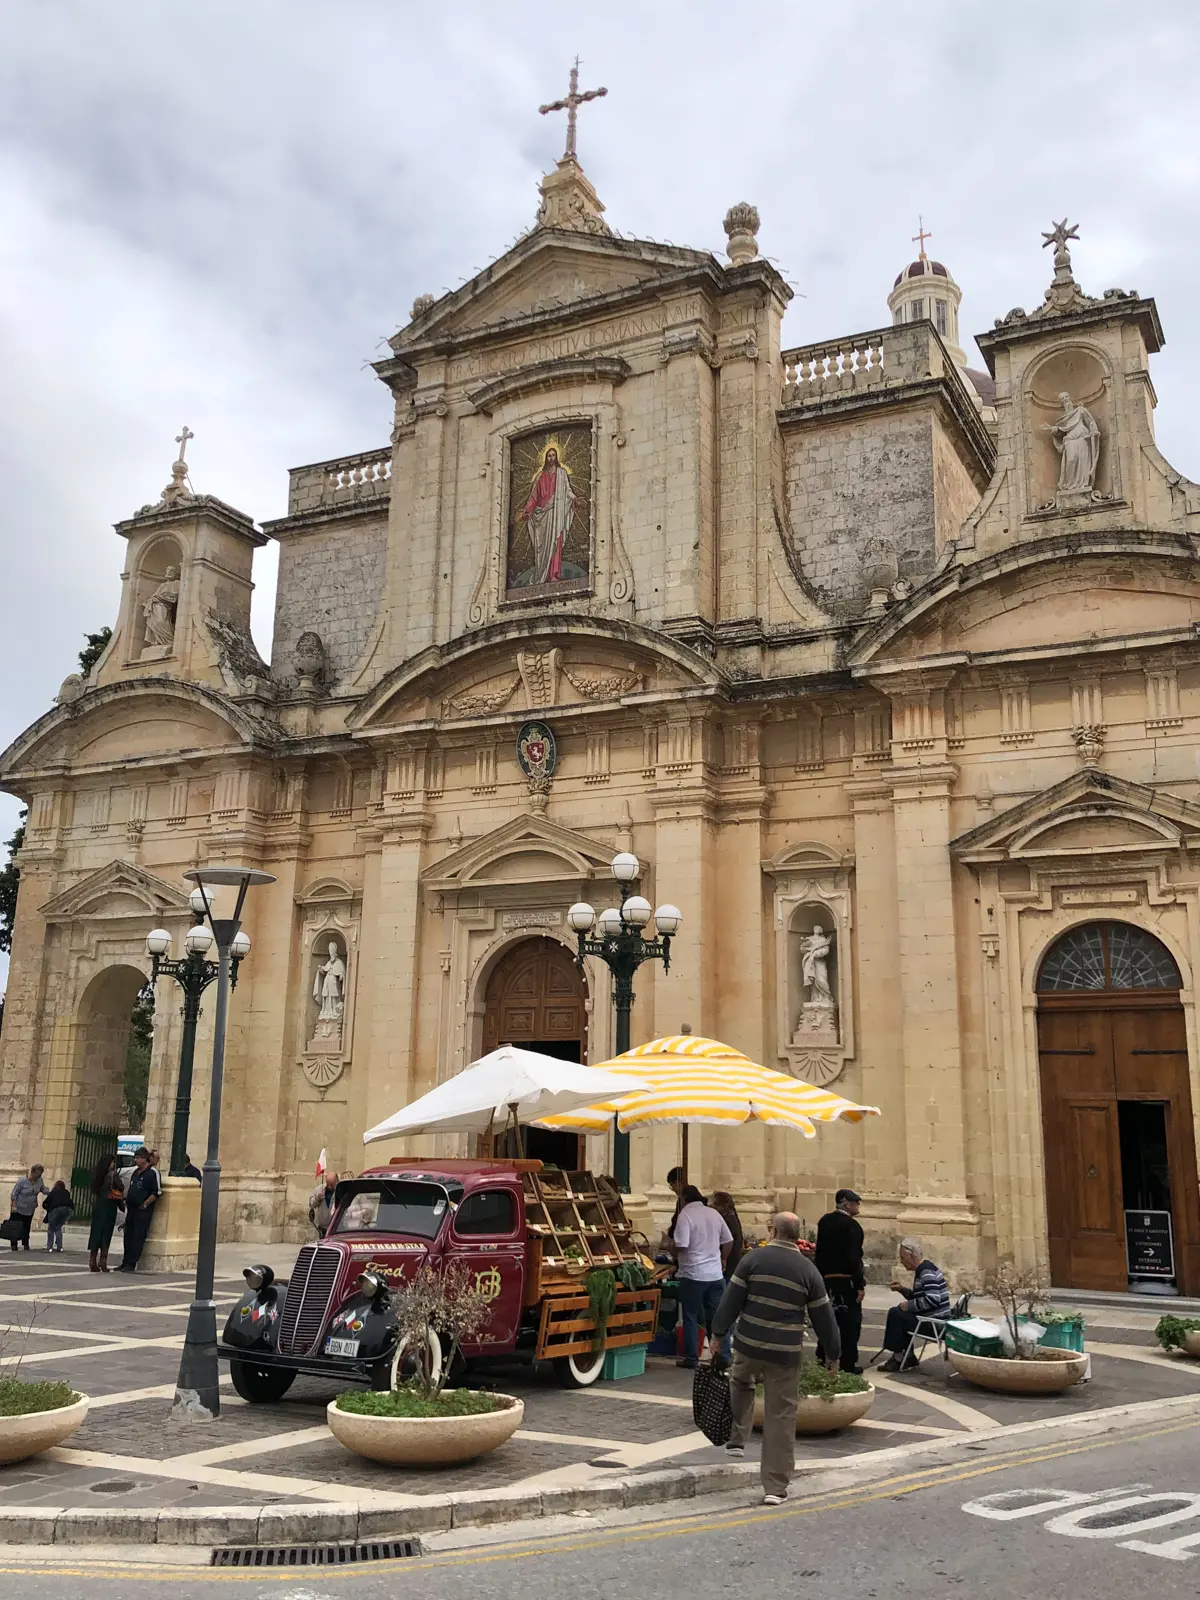 Parish Church of St Paul outside of Mdina old town